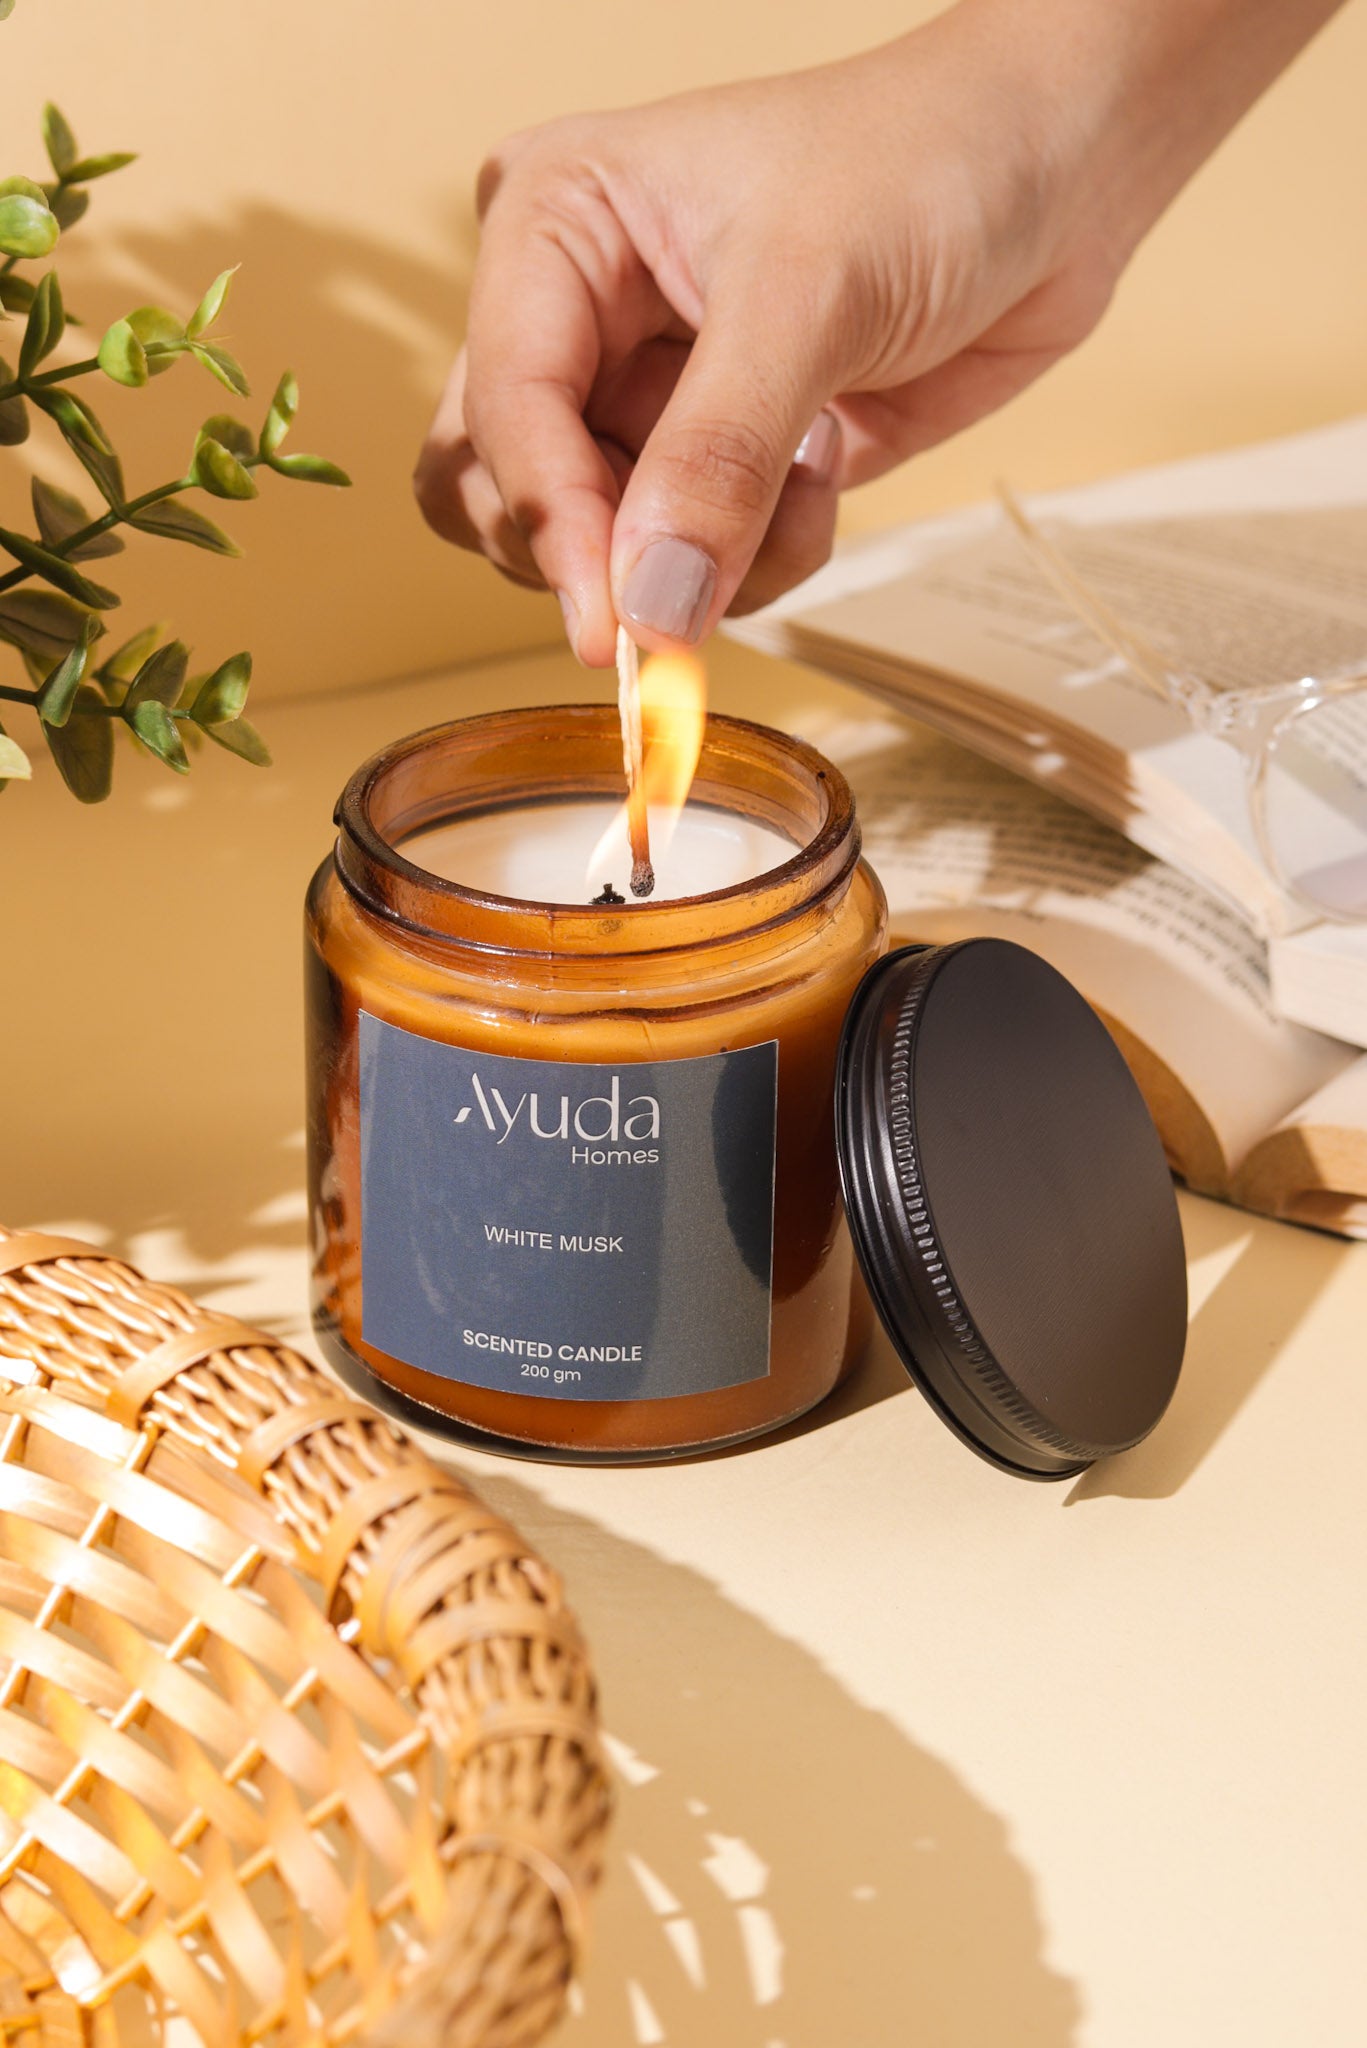 White Musk Scented Candle - Soy Wax | Amber Glass Jar - Ayuda Homes